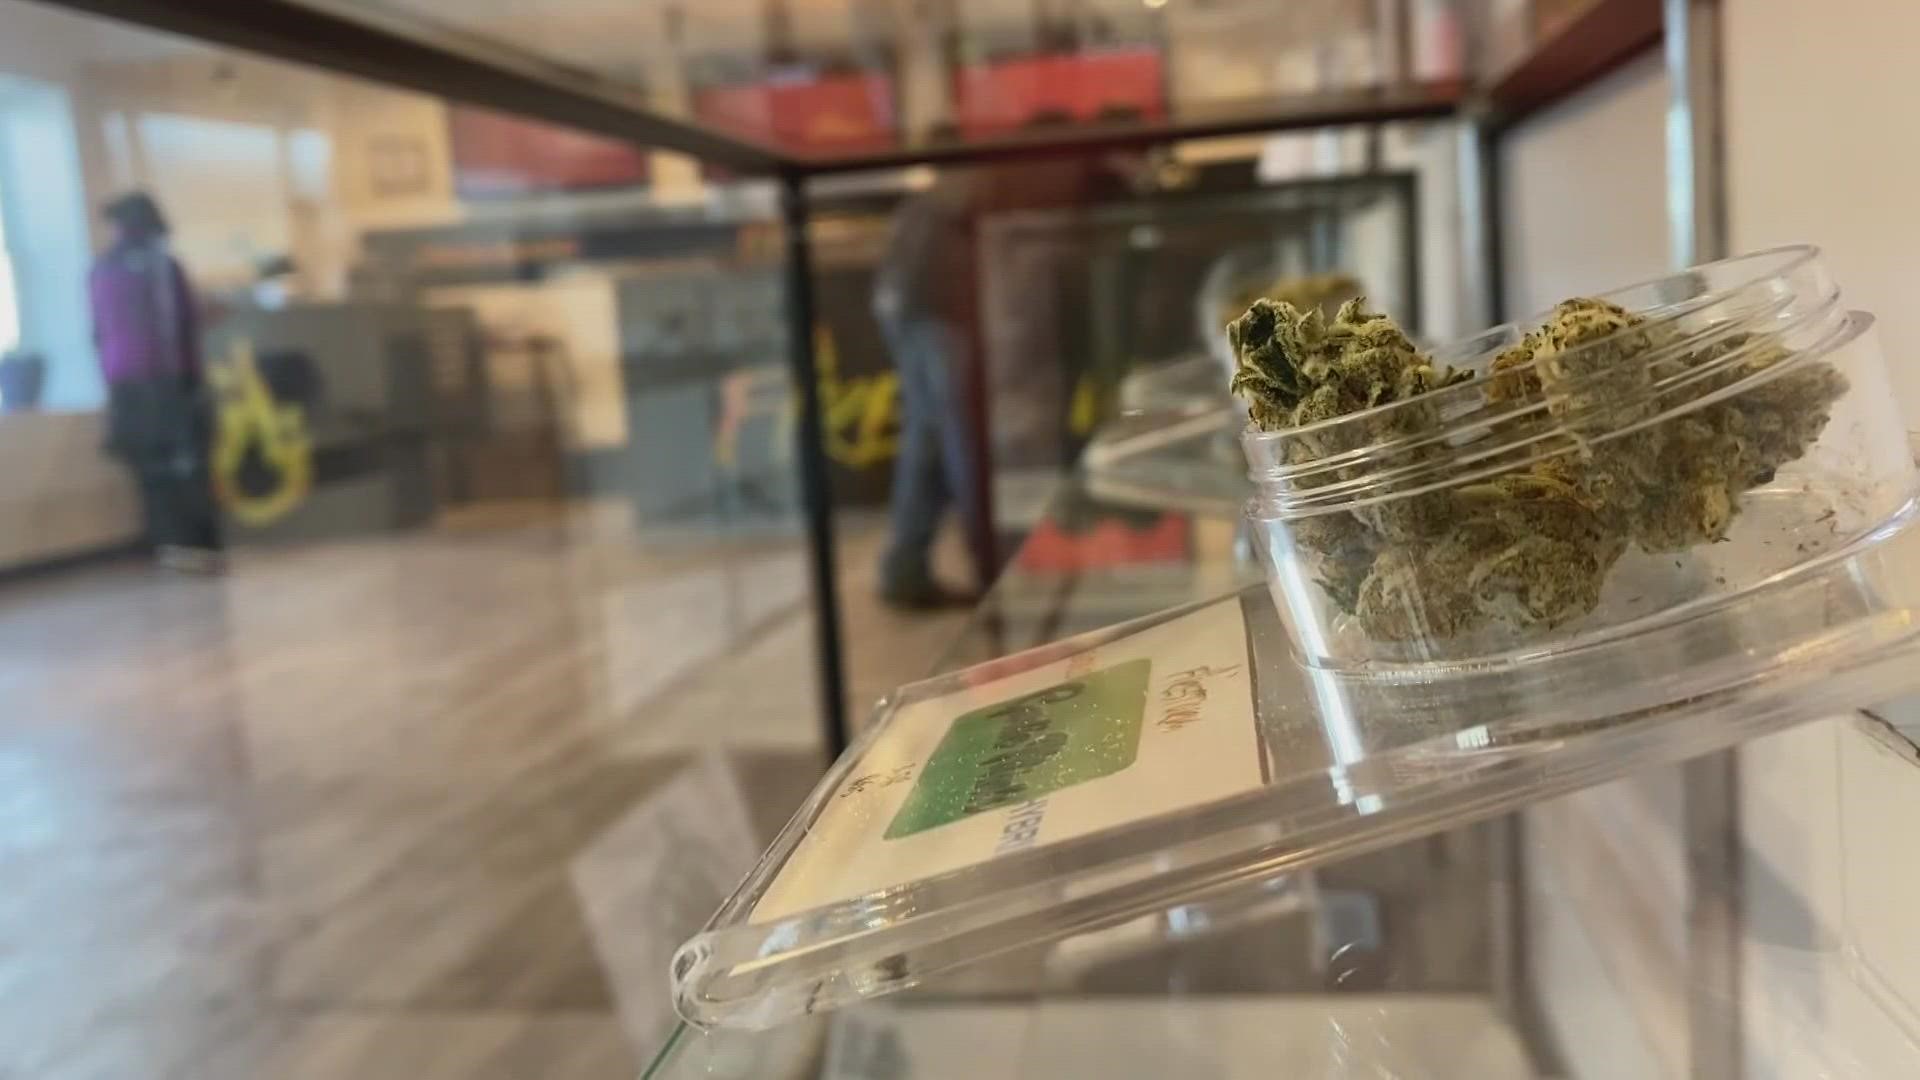 Recreational marijuana shops across the state saw major increases in sales over the summer, with over $10 million worth of product sold just last month.